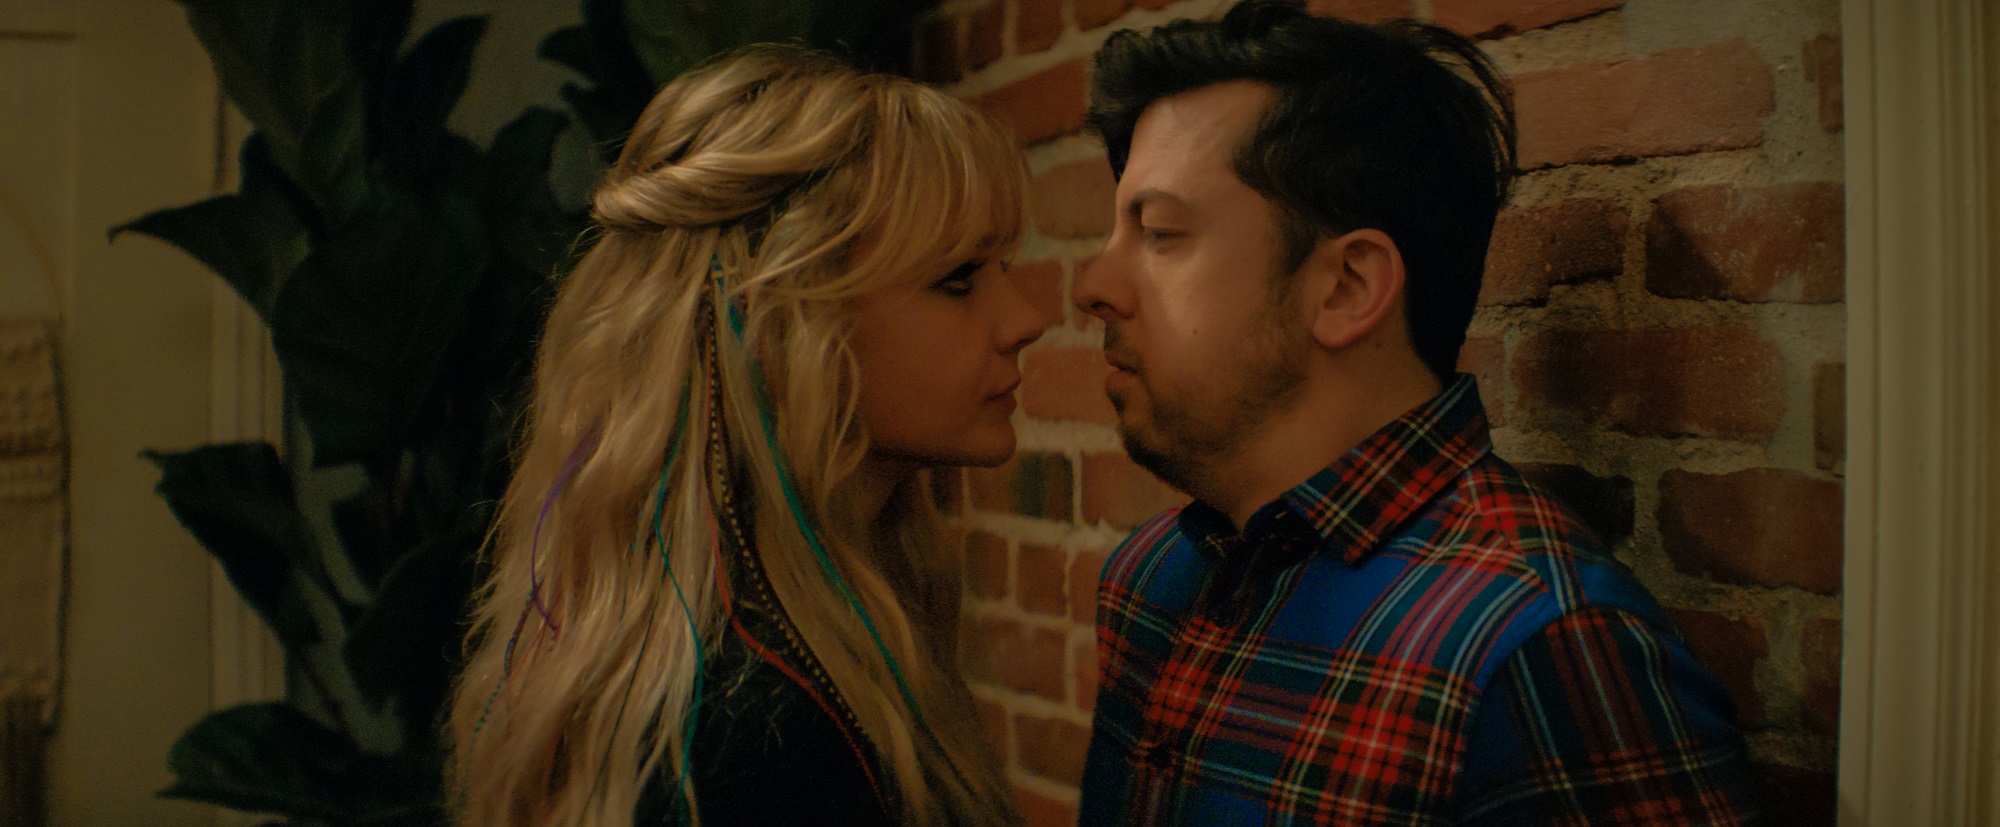 Carey Mulligan and Christopher Mintz-Plasse in Promising Young Woman